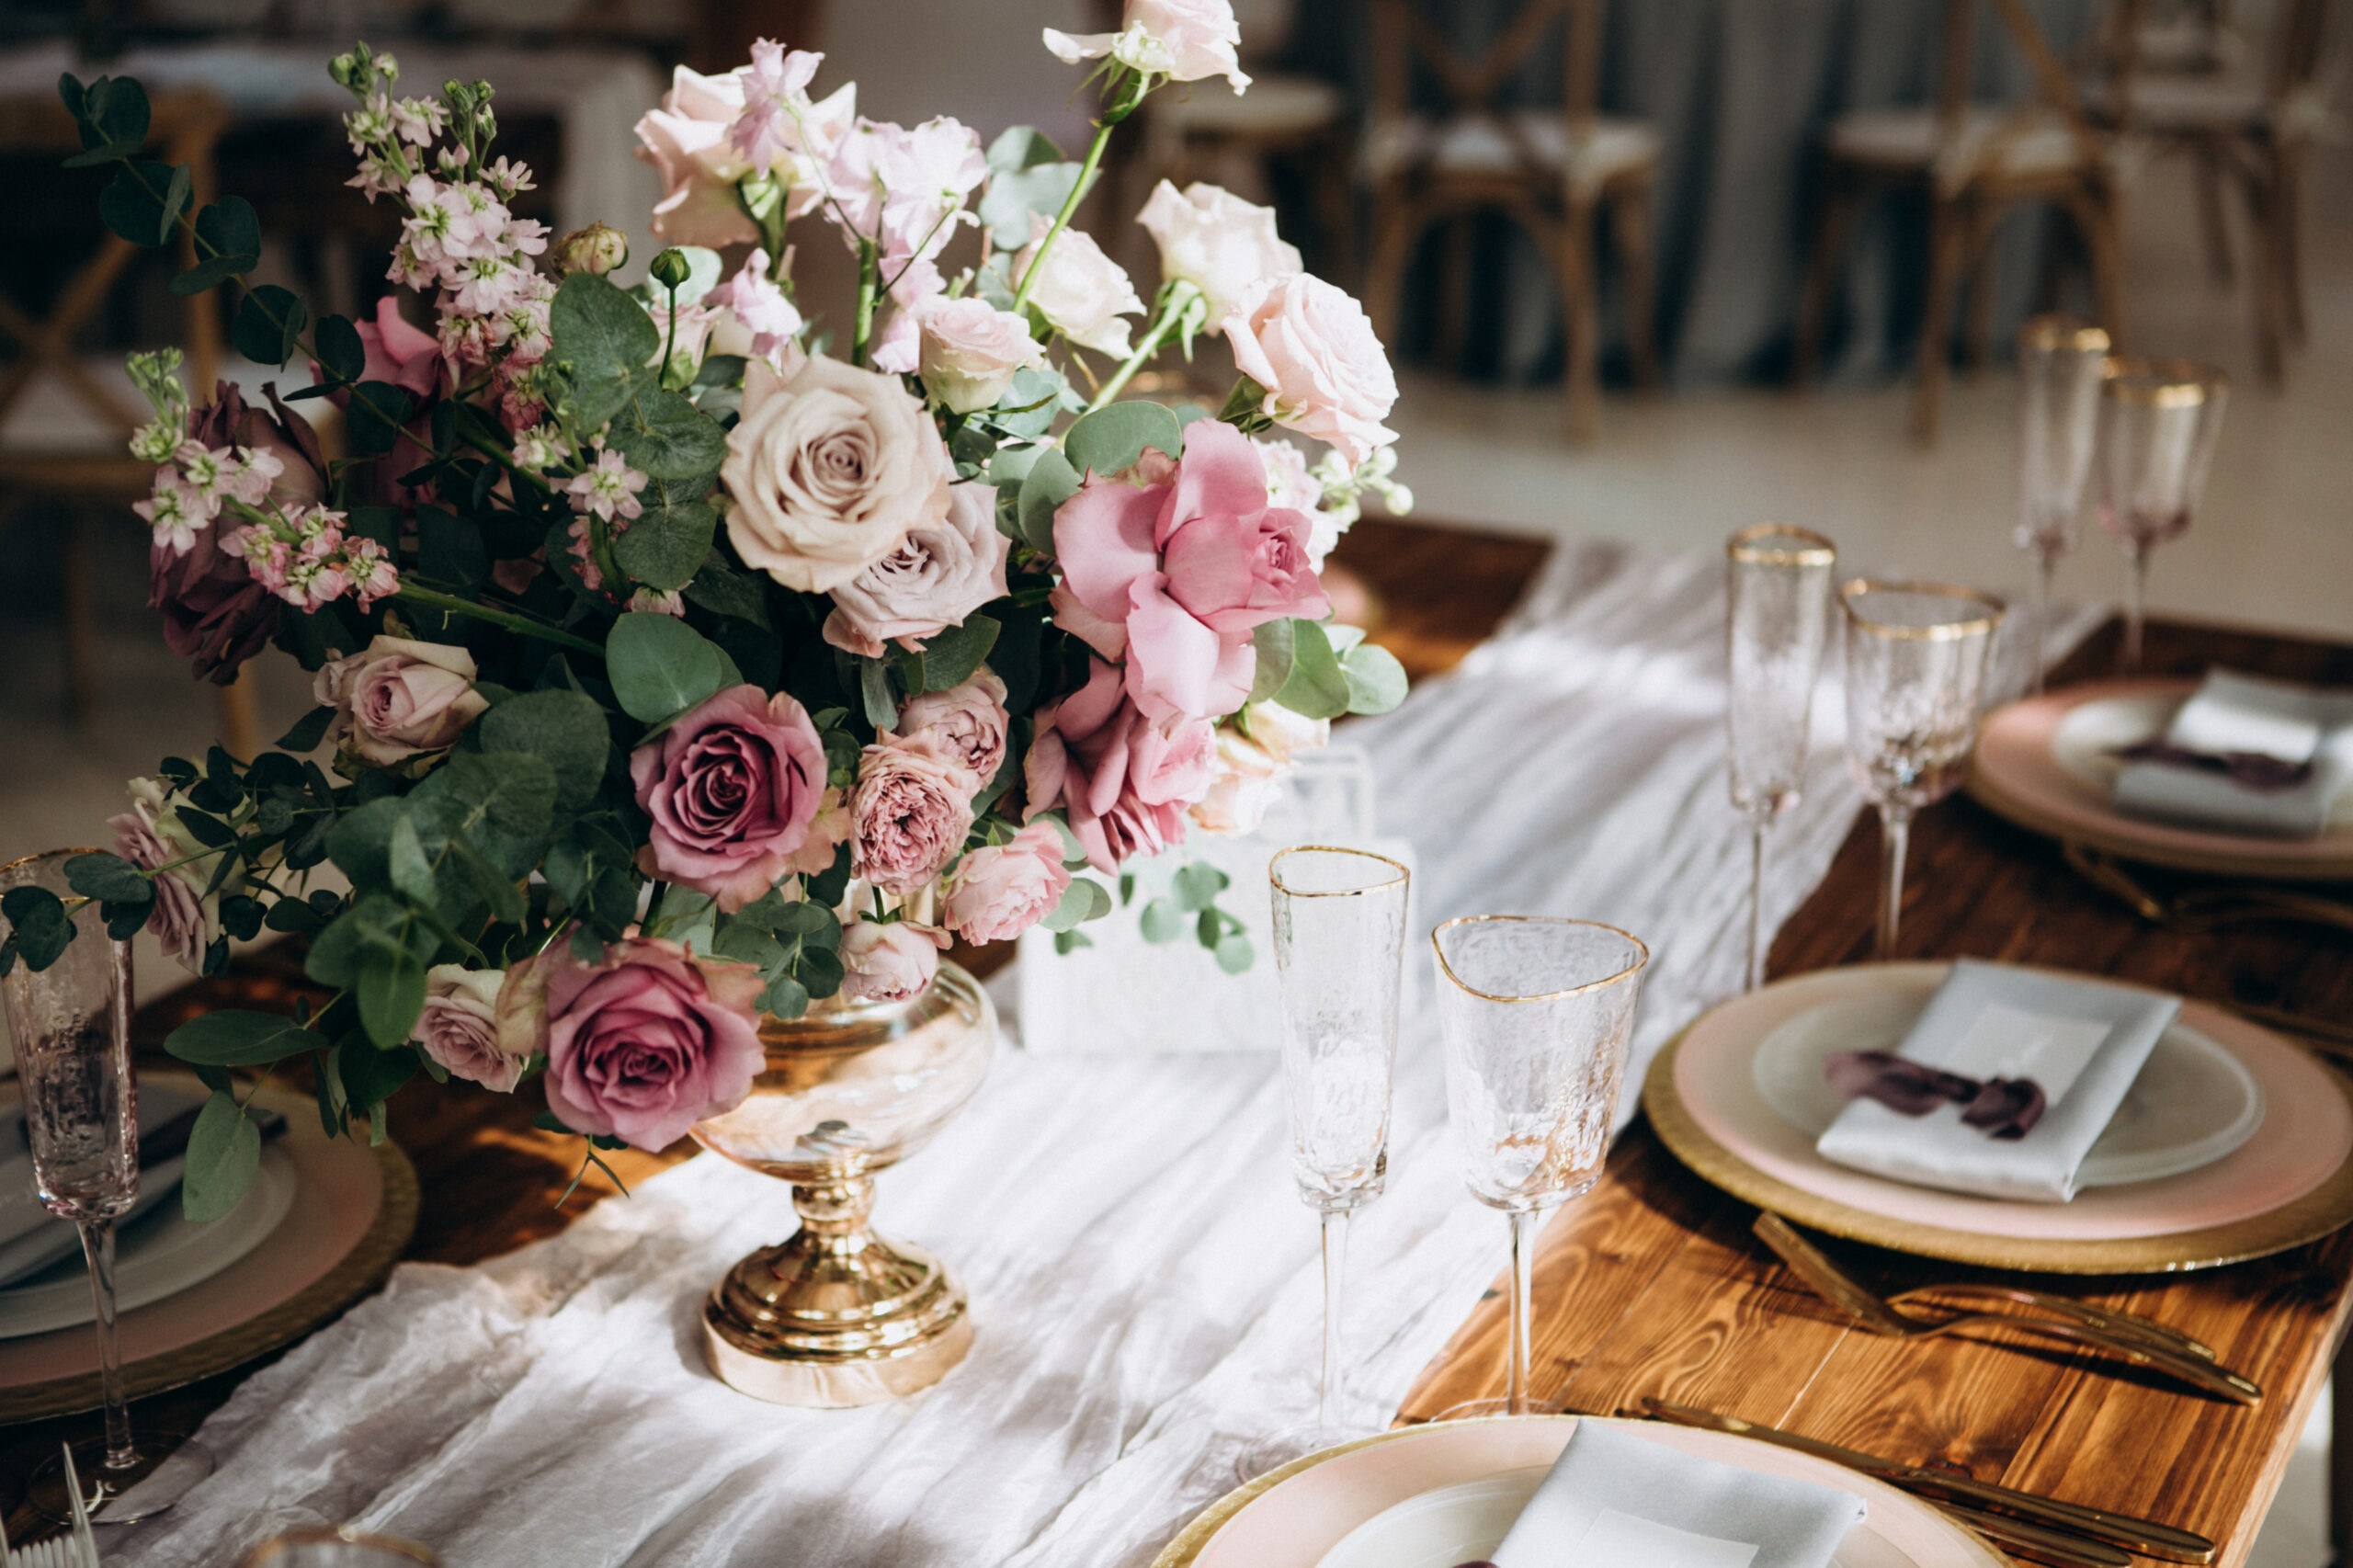 Wedding,Decoration,With,Flowers,And,Vintage,Elements